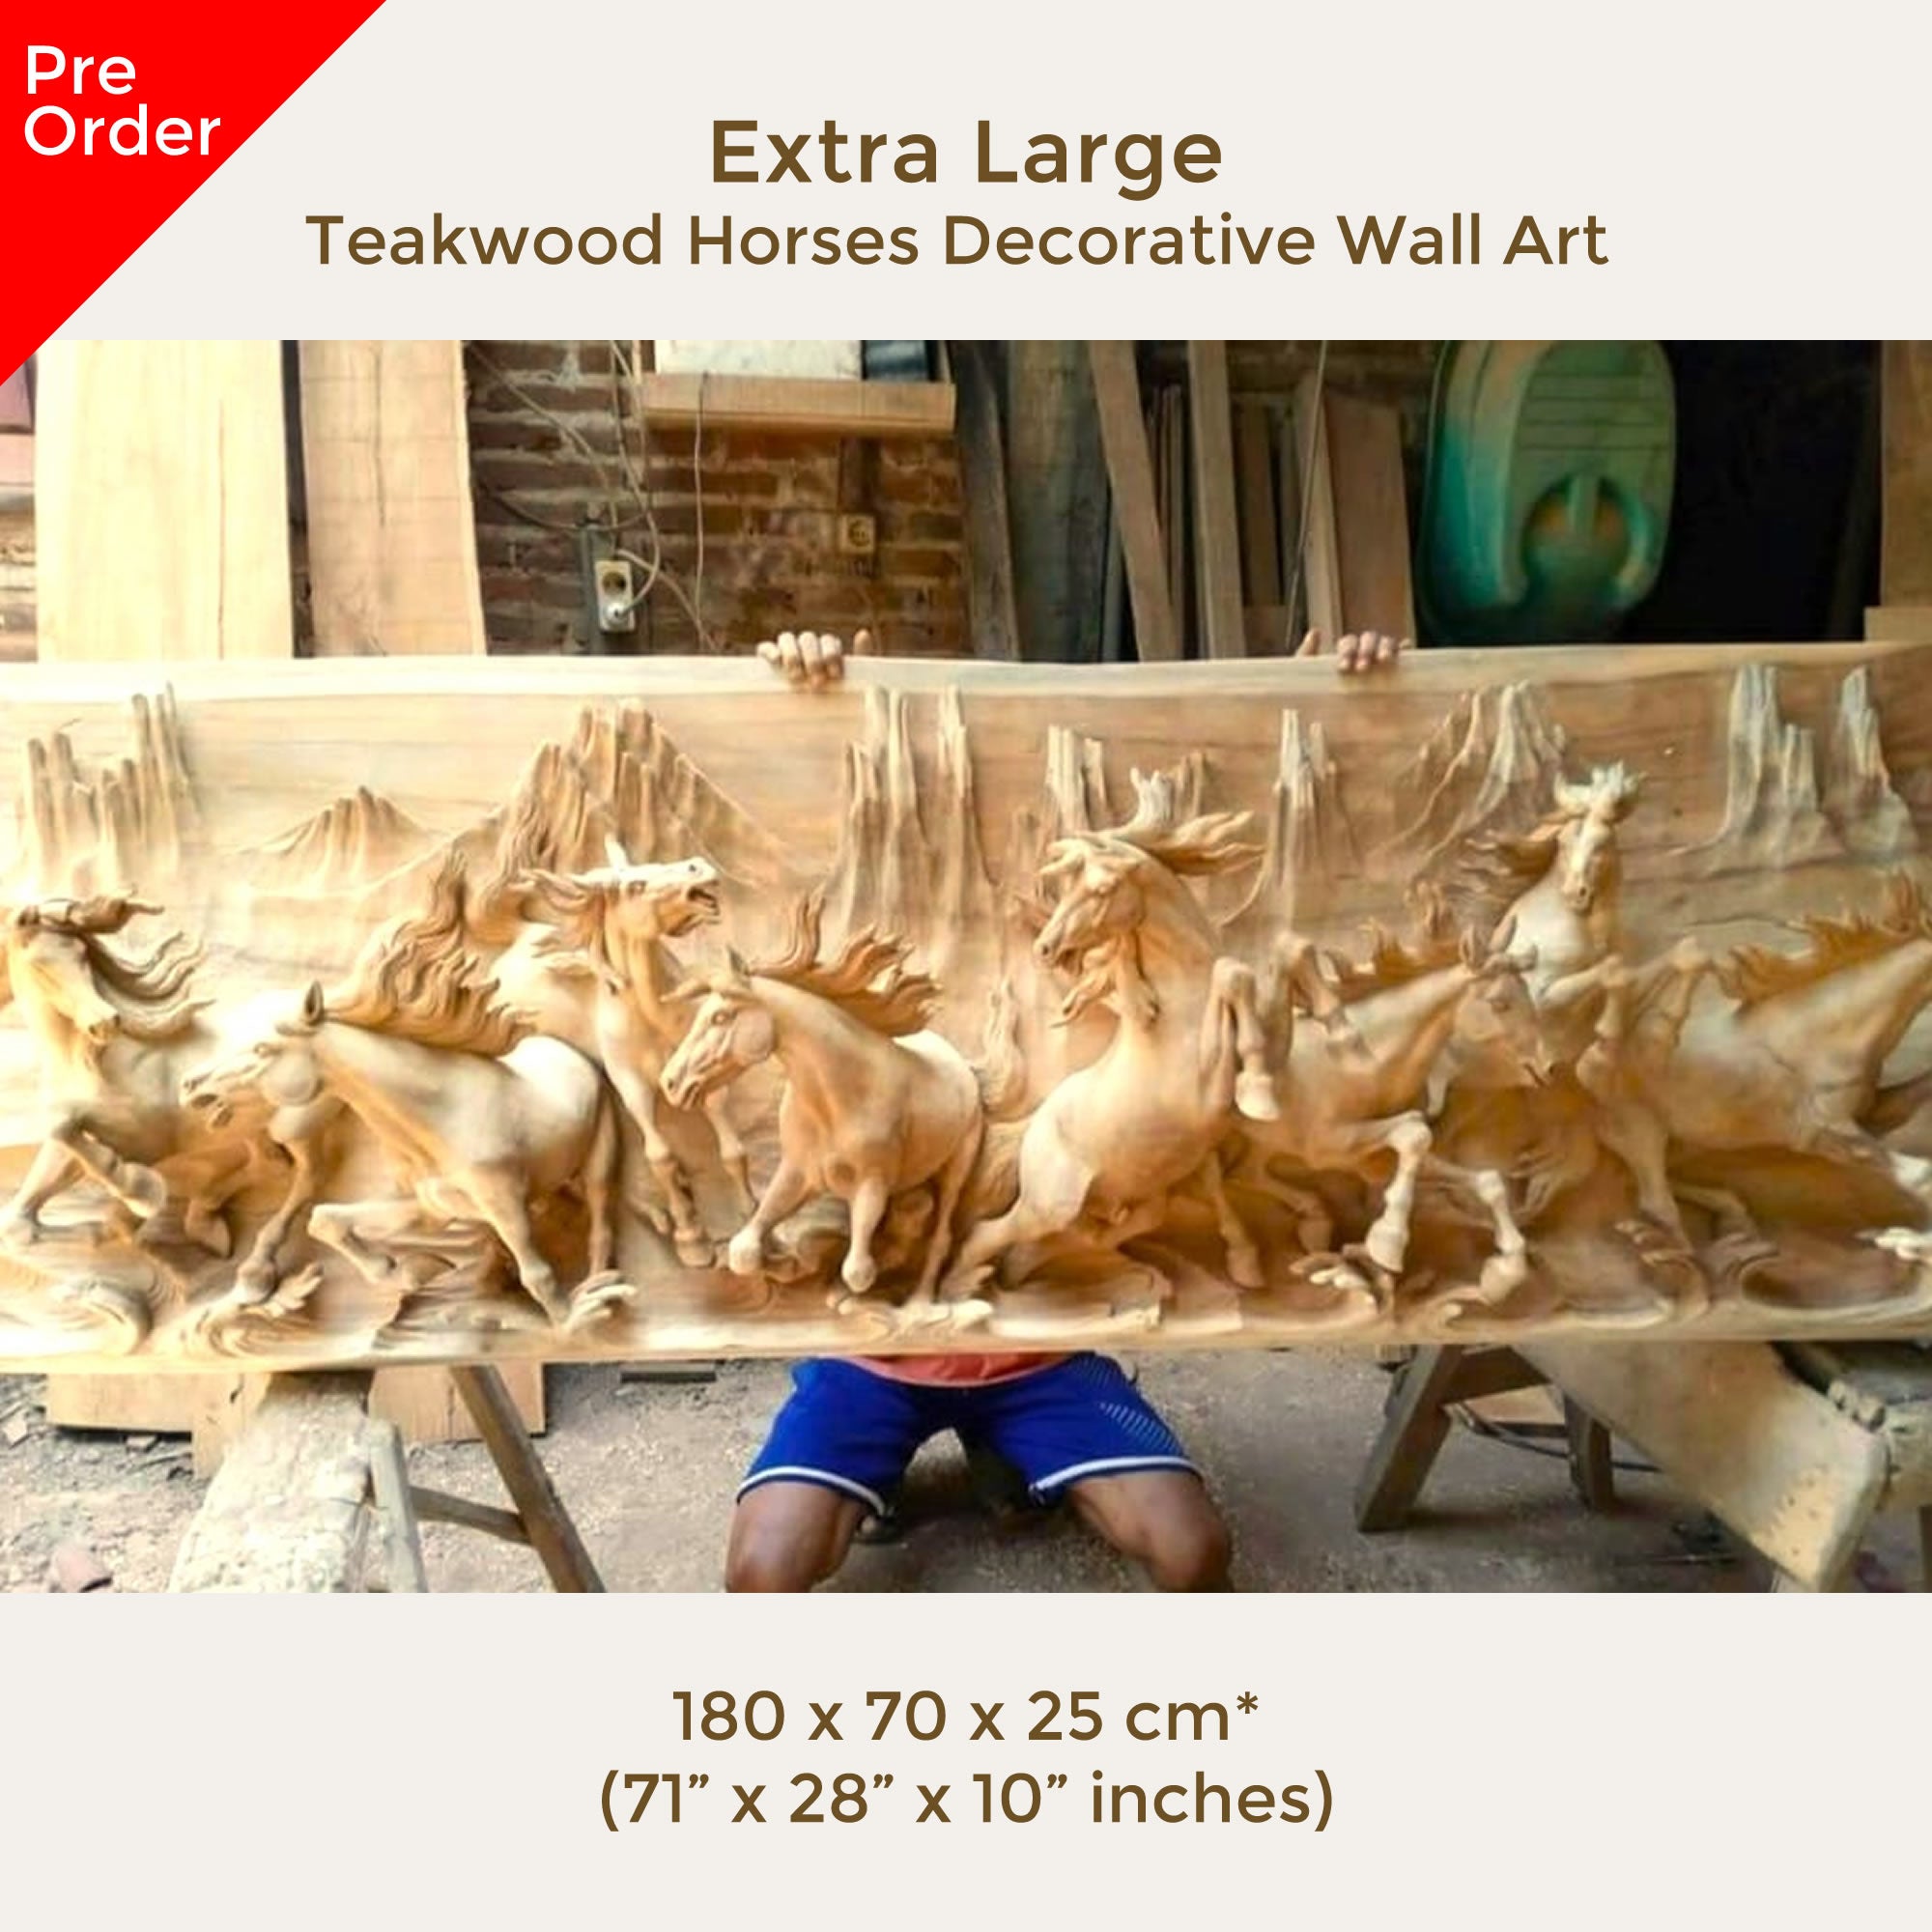 Extra large king-size teakwood hand-carved running wild horses sculpture art for a perfect backdrop in any room, hallway or as a headboard.